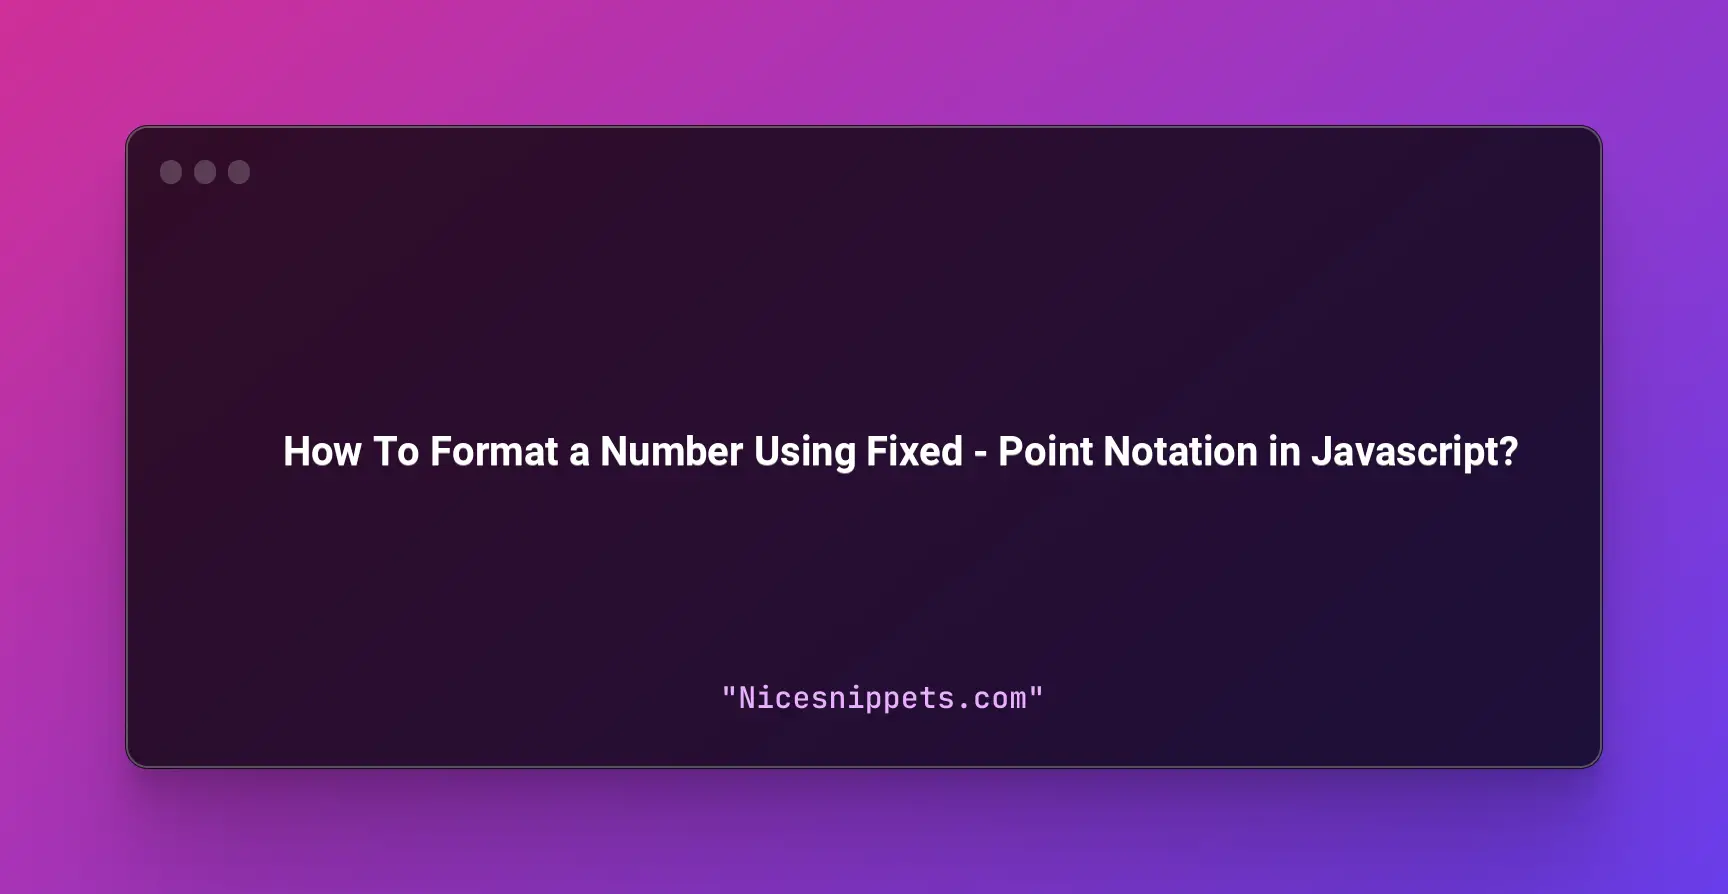 How To Format a Number Using Fixed - Point Notation in Javascript?